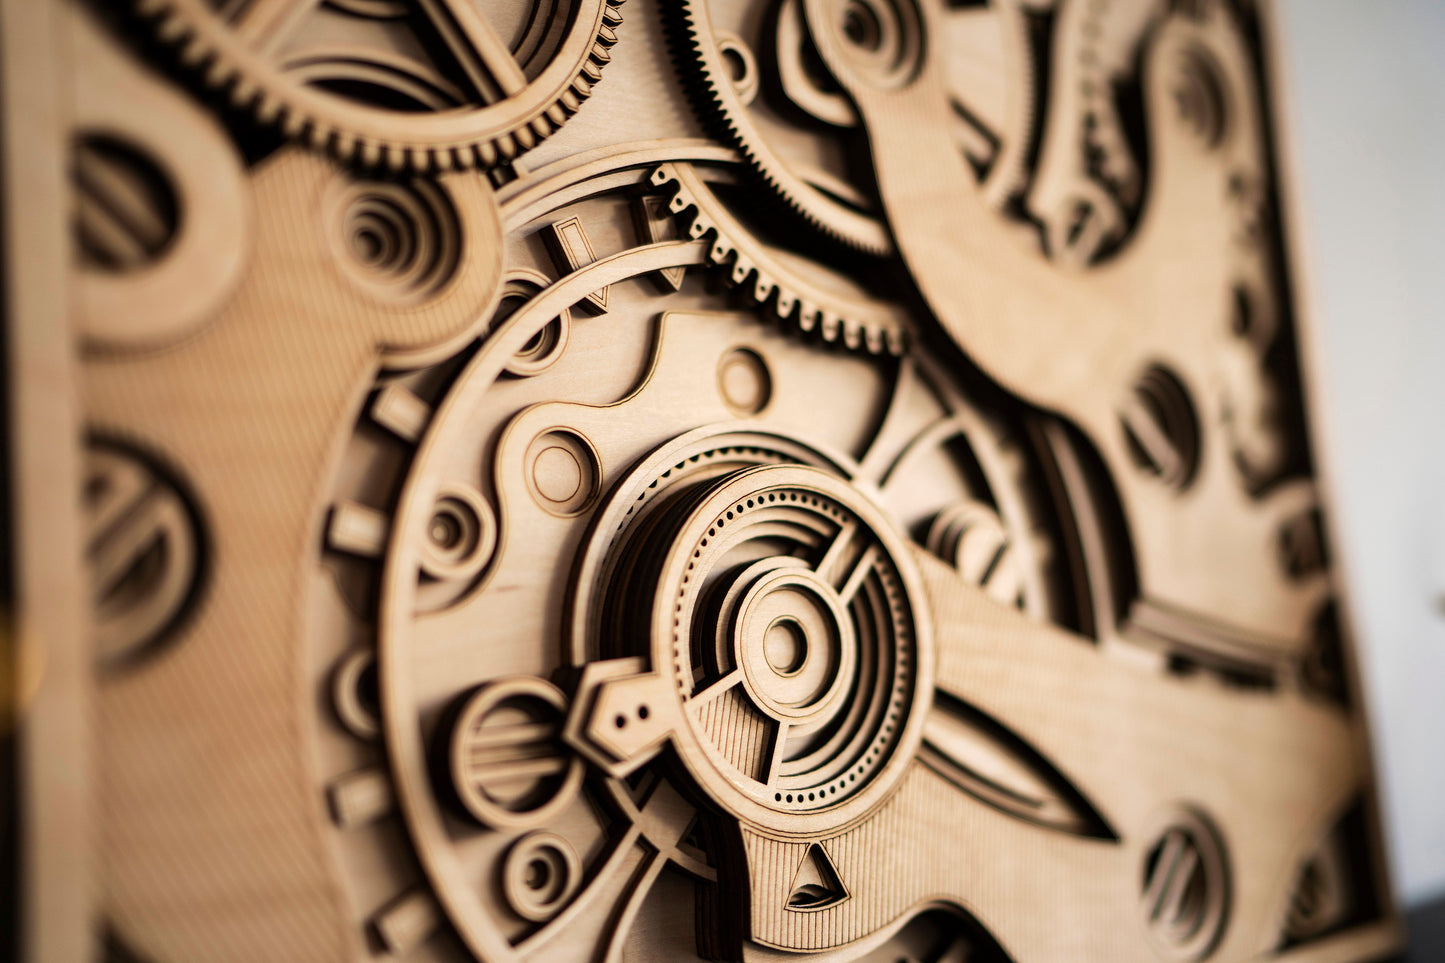 STEREOWOOD-Time Gear